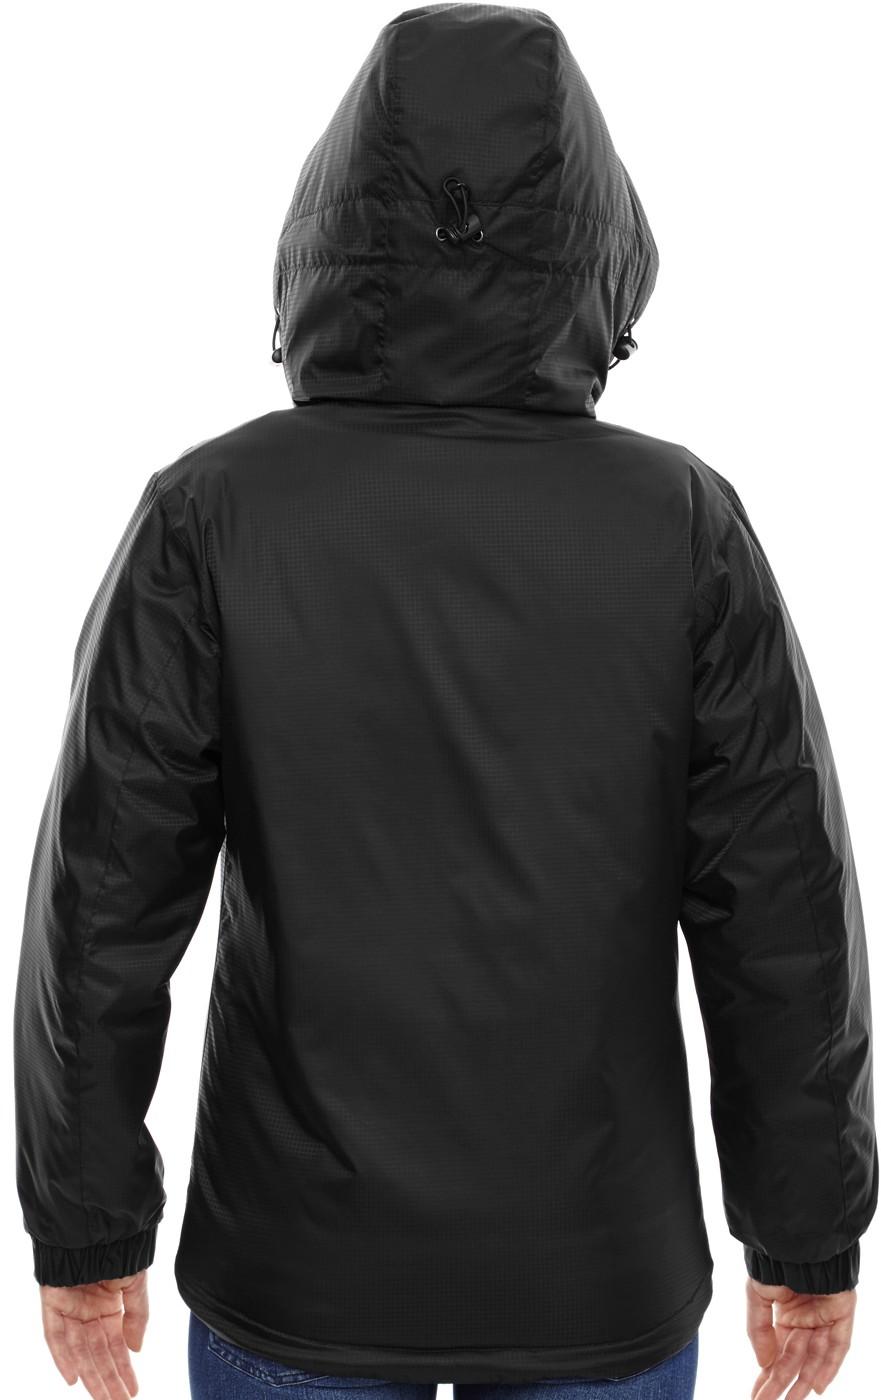 A Really Warm Jacket! 2 Hi -Loft Insulated Jacket - #78059 Ladies #88137 Men s Hi-Loft Insulated Jacket features overall insulation for ultimate warmth!